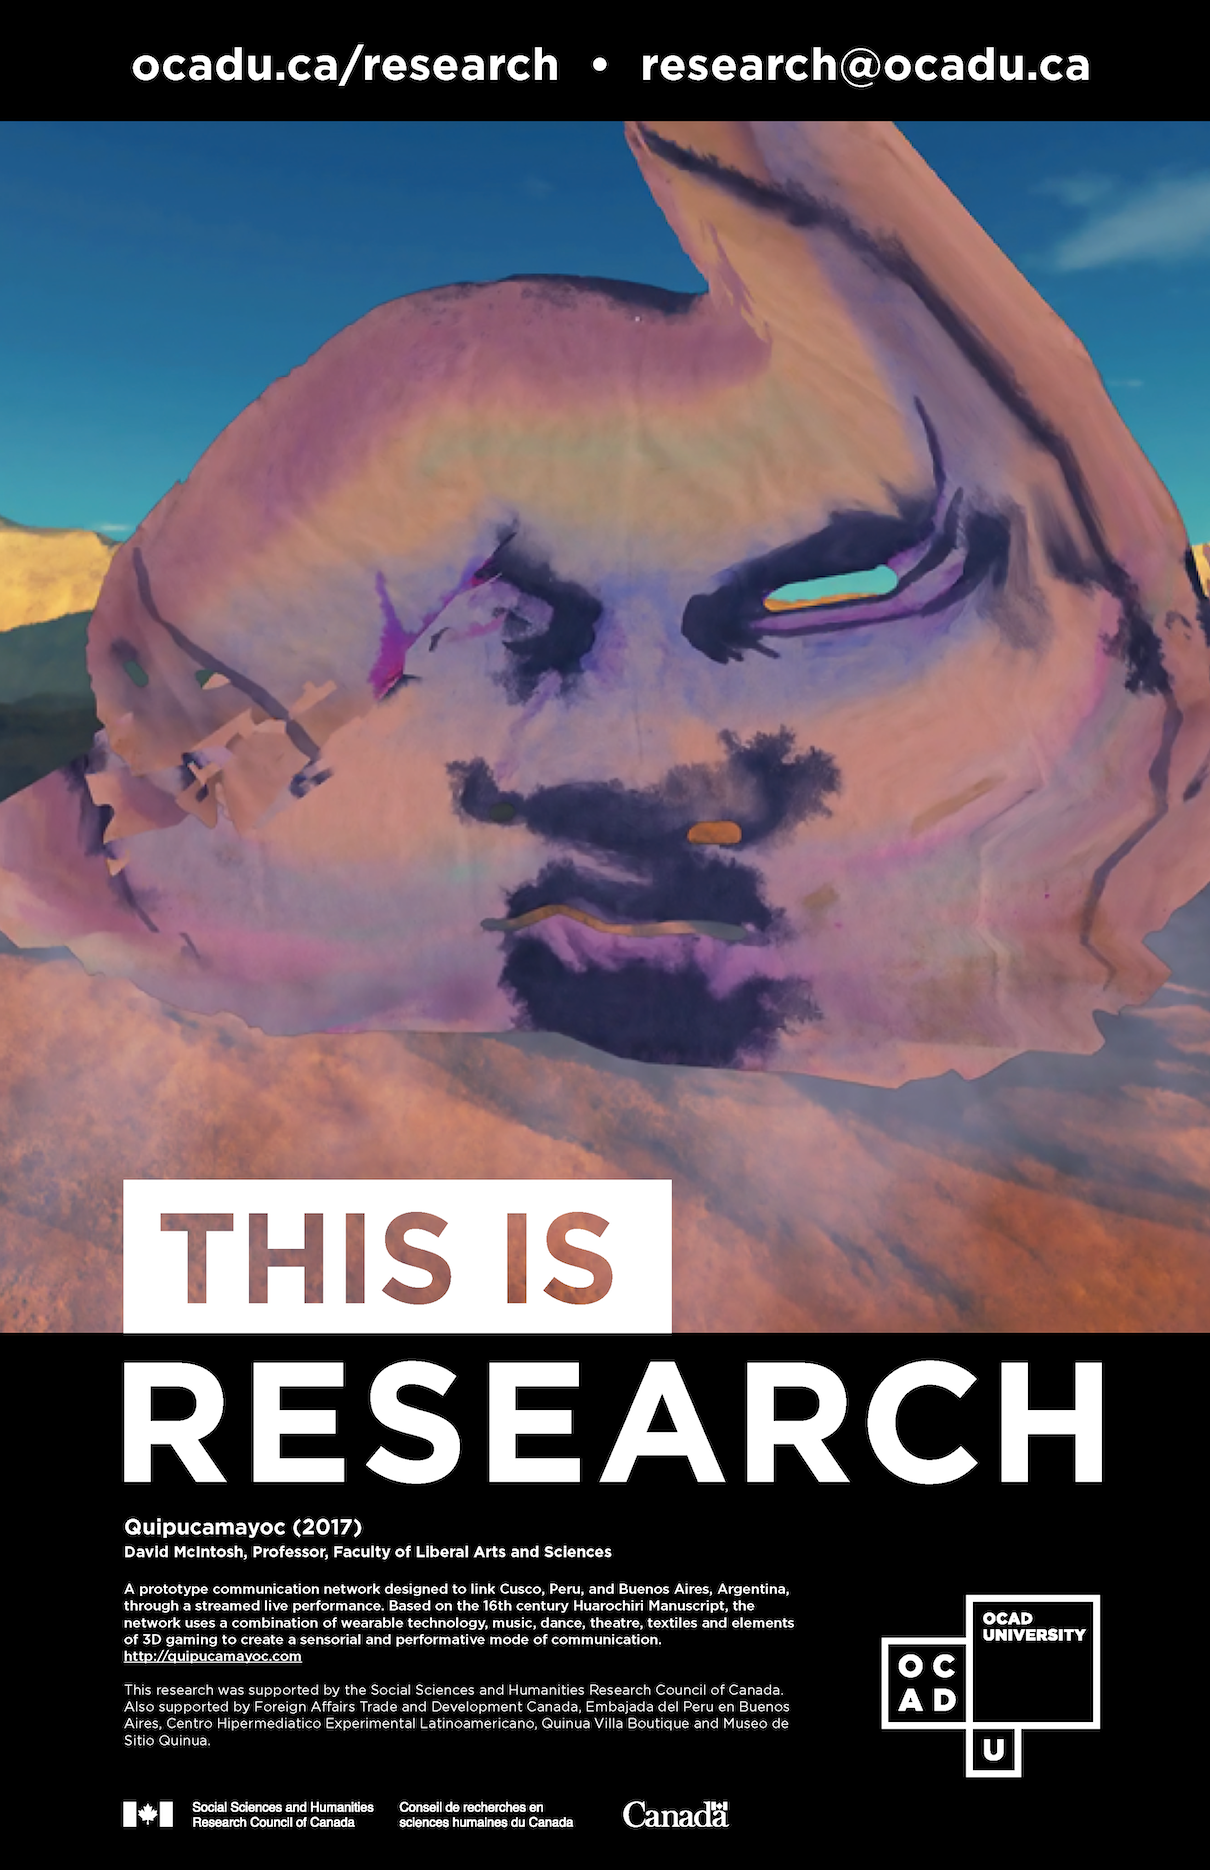 "This is Research" Poster: Quipucamayoc